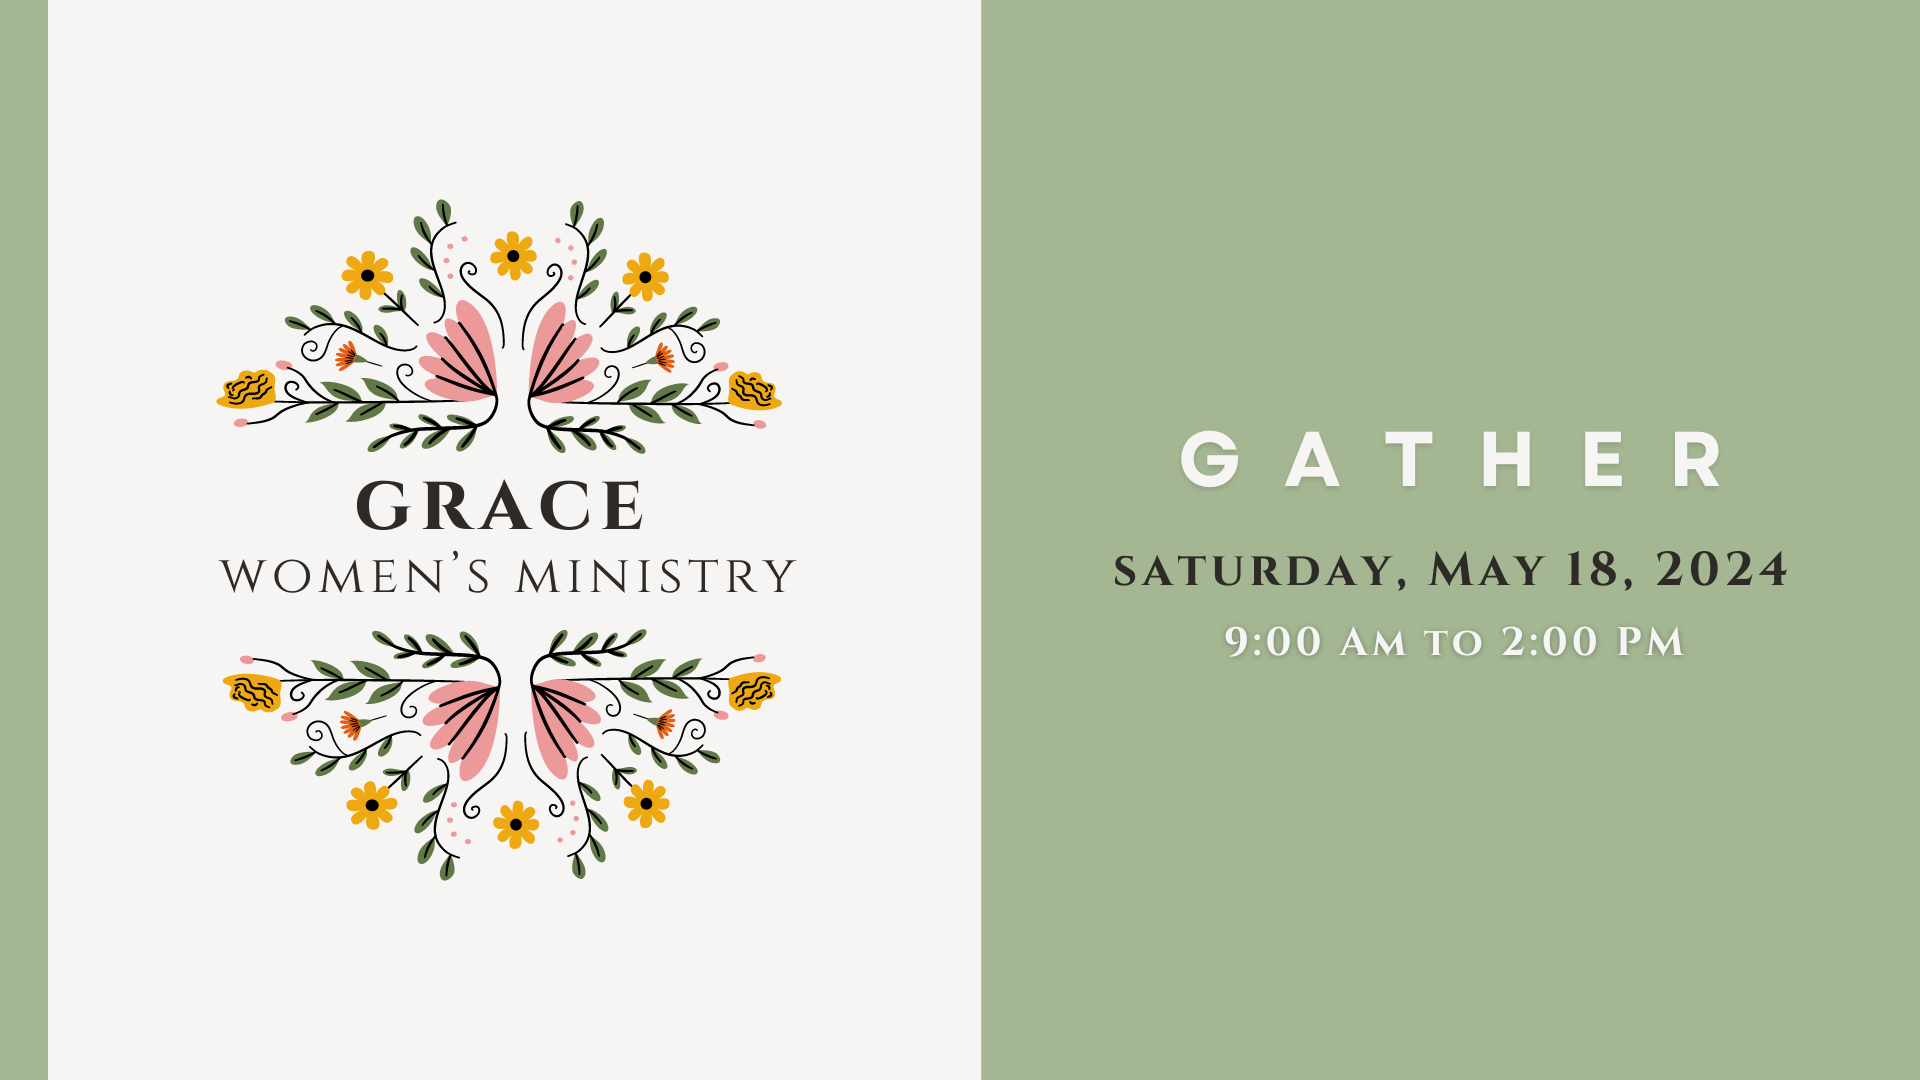 Women's Ministry Conference - Gather - May 18